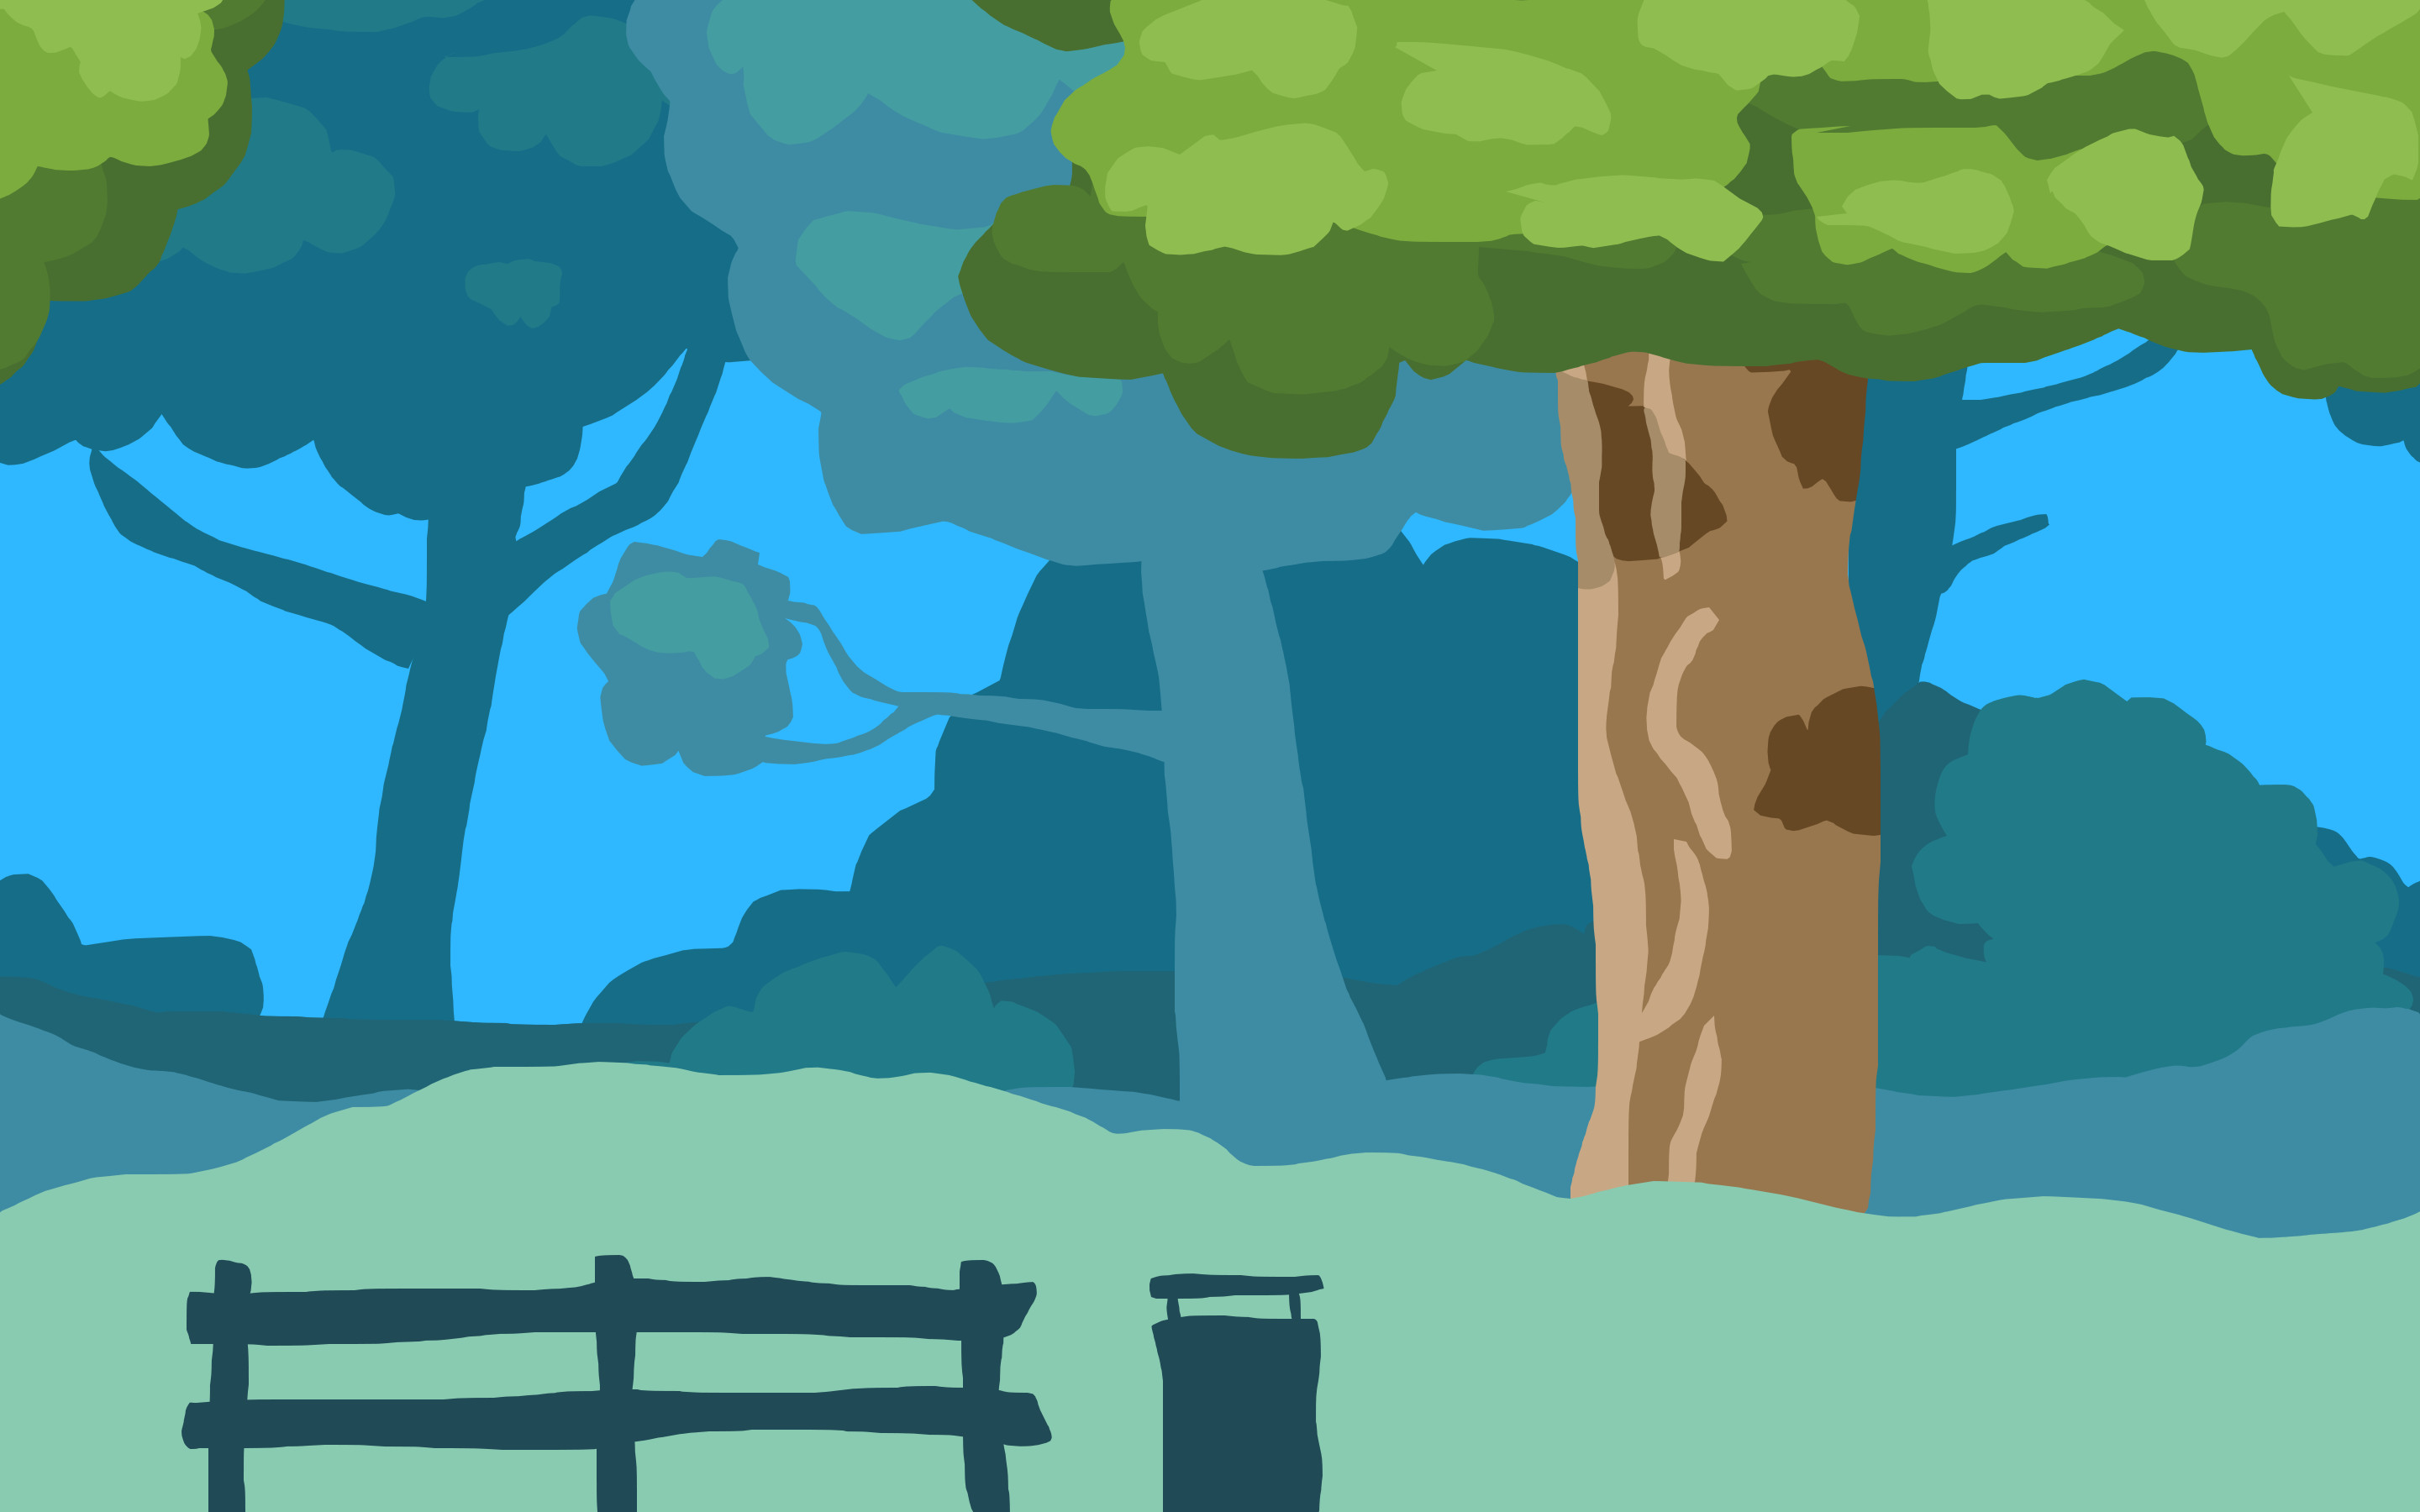 Simple scrolling background created for the Cake Spree prototype game